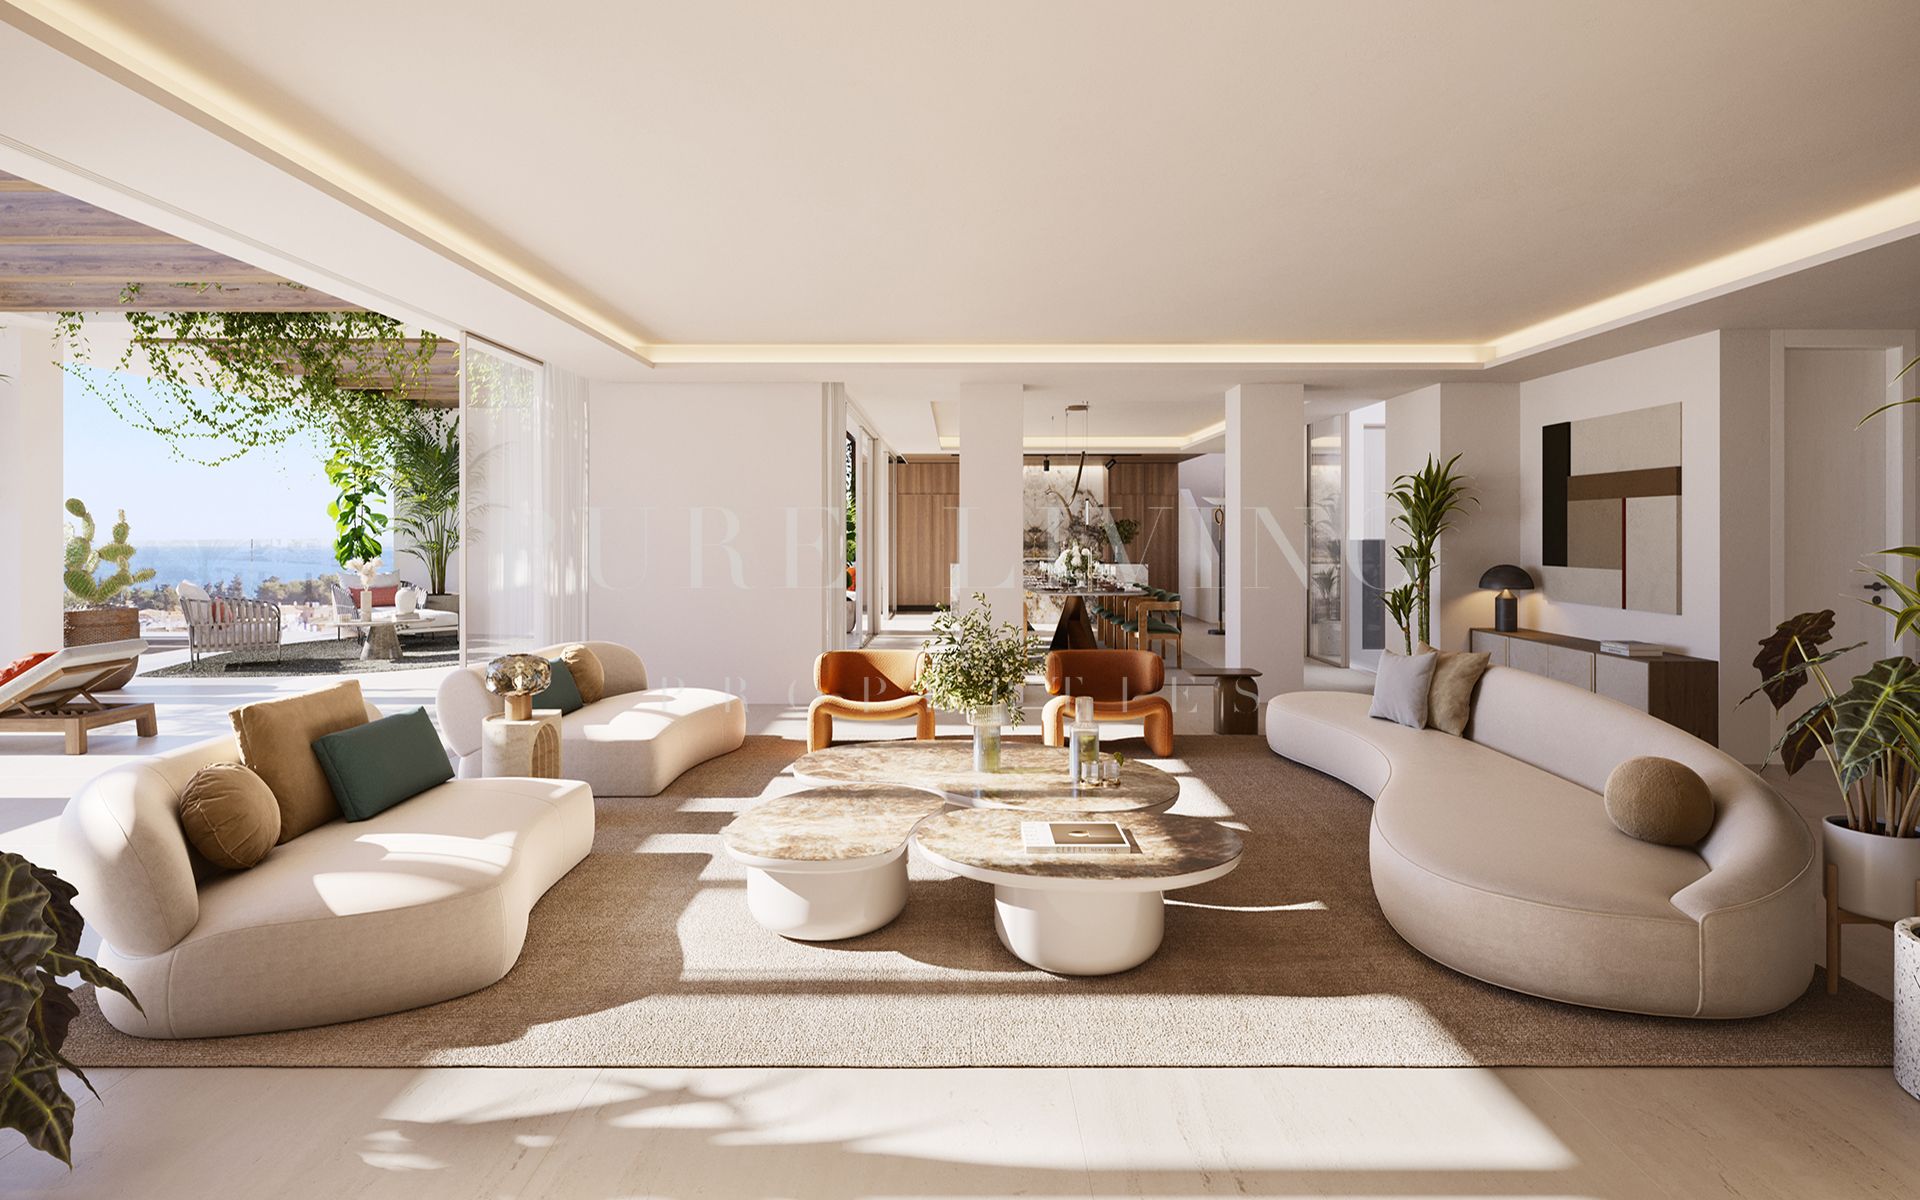 Spectacular 4-bedroom middle floor apartment in the newest development on Marbella's Golden Mile - EARTH